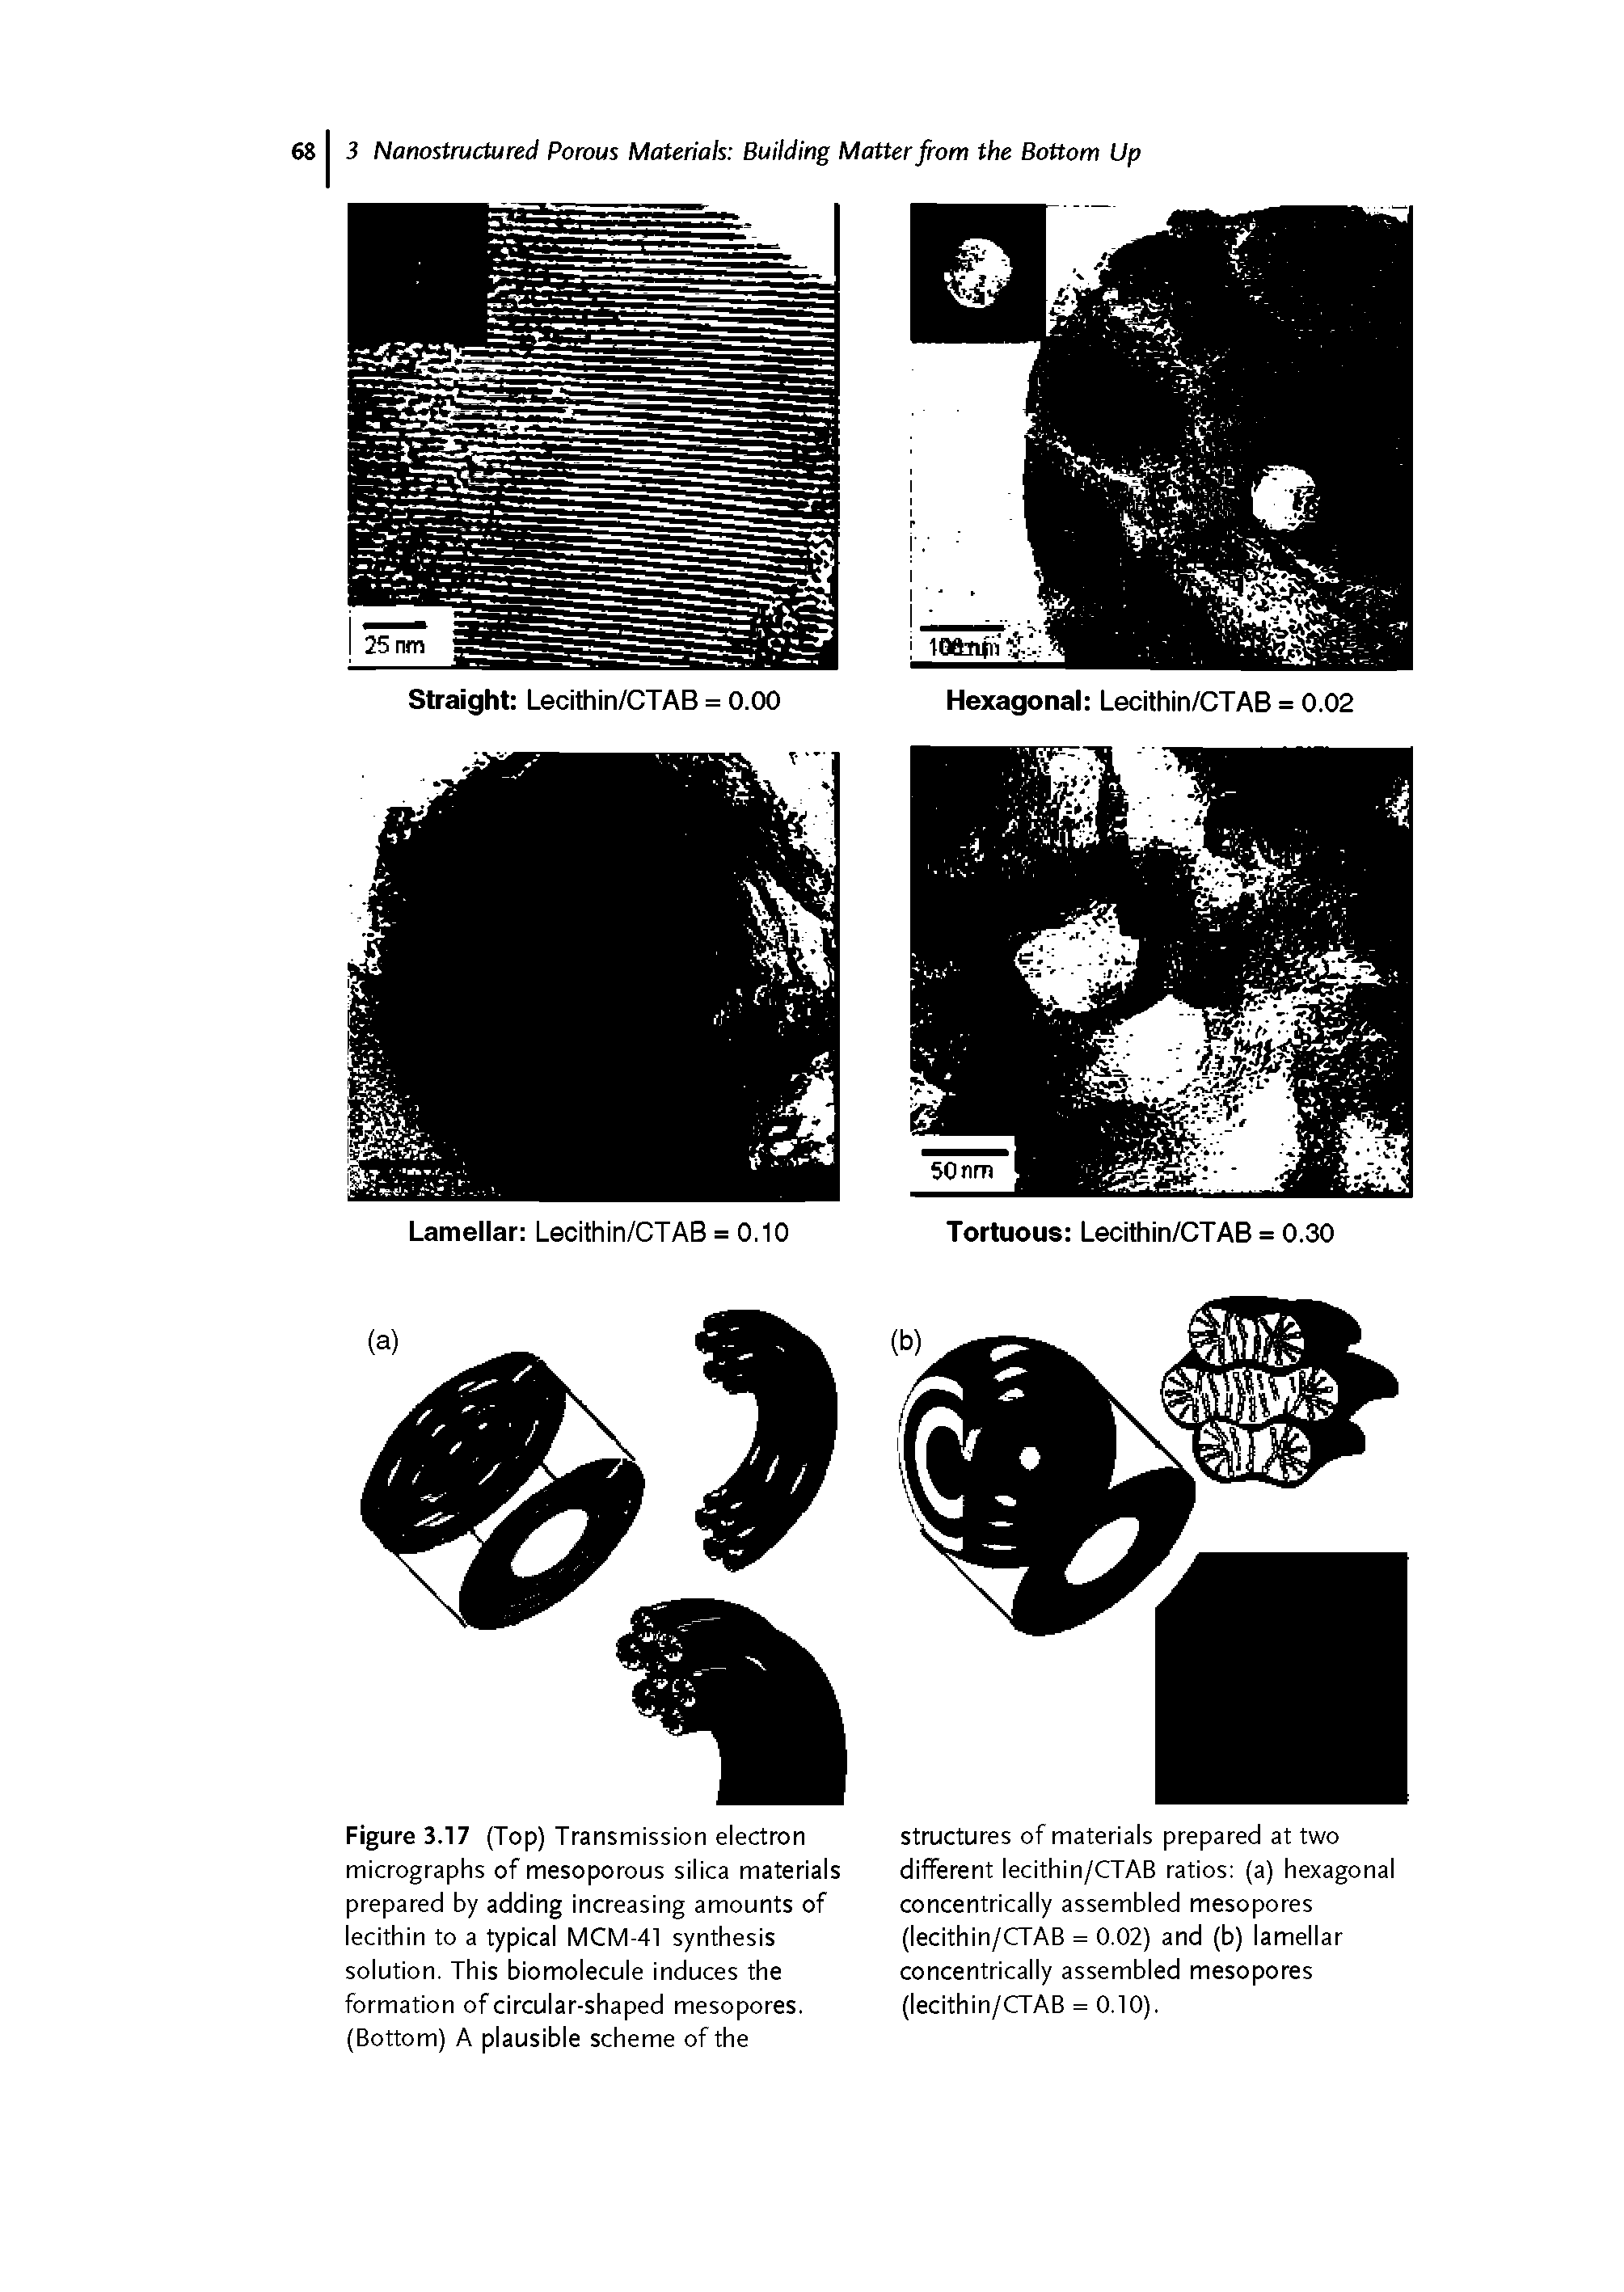 Figure 3.17 (Top) Transmission electron micrographs of mesoporous silica materials prepared by adding increasing amounts of lecithin to a typical MCM-41 synthesis solution. This biomolecule induces the formation of circular-shaped mesopores. (Bottom) A plausible scheme of the...